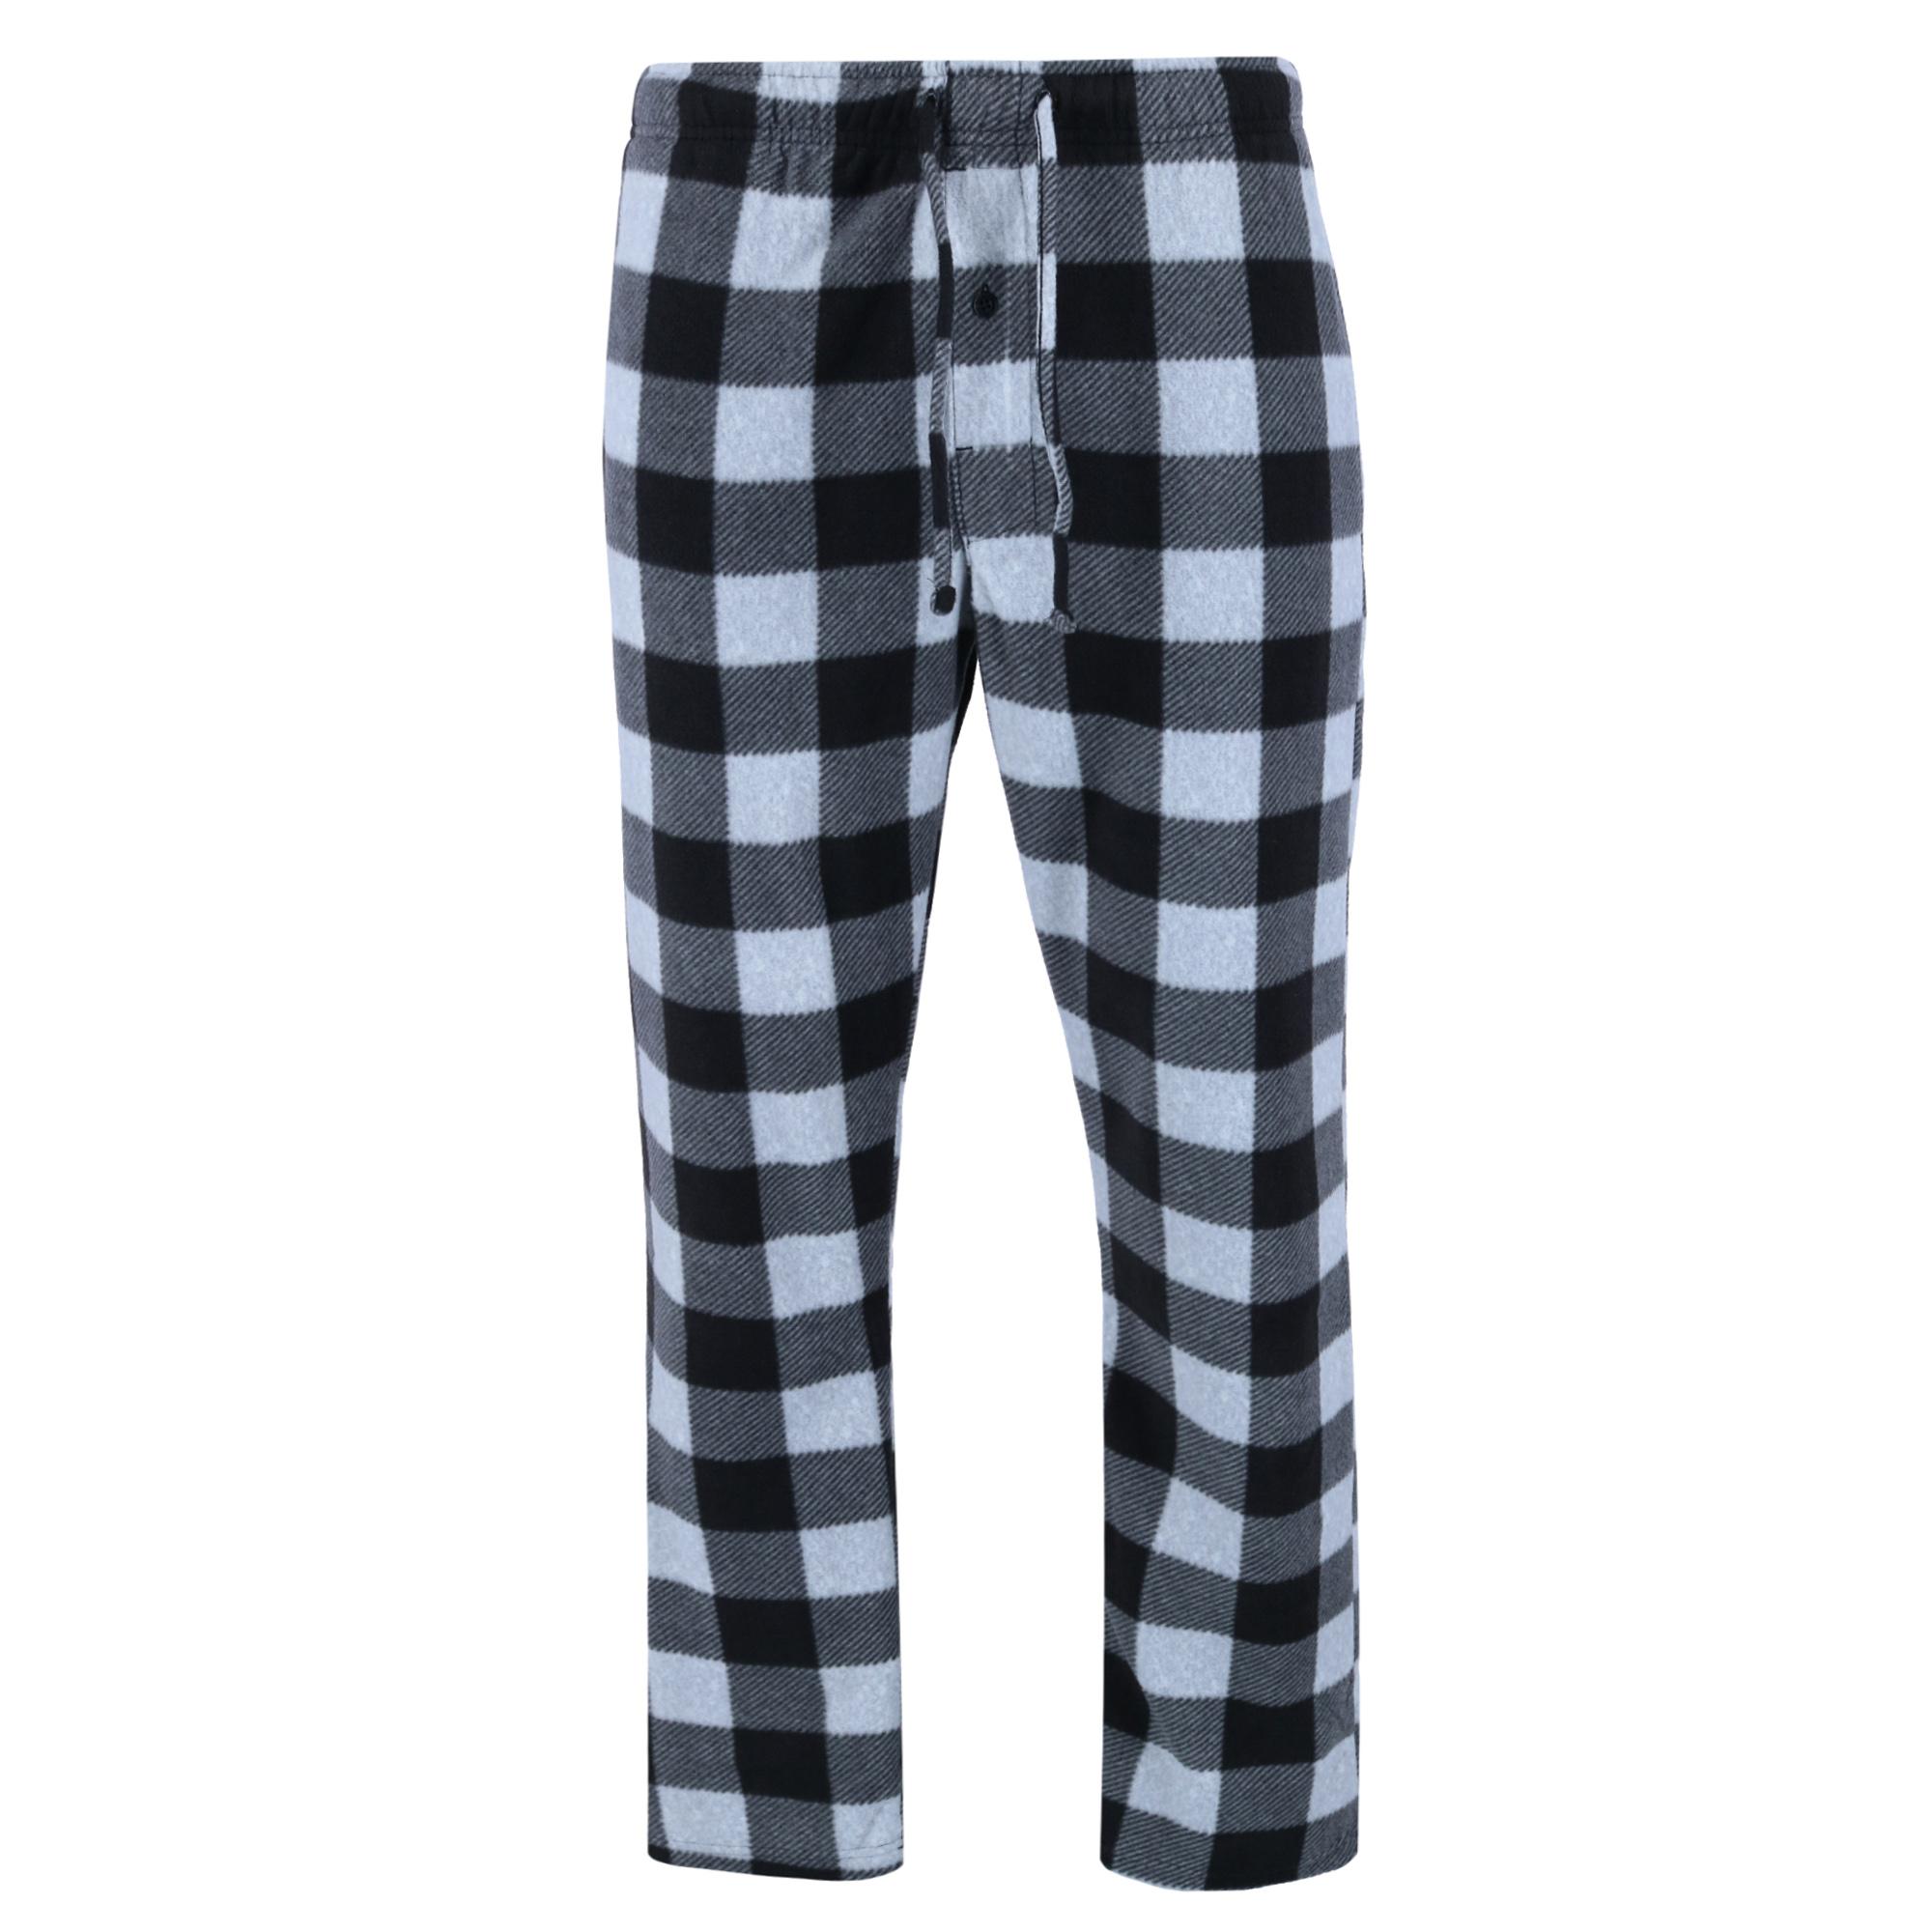 Selected Color is Grey Buffalo Plaid